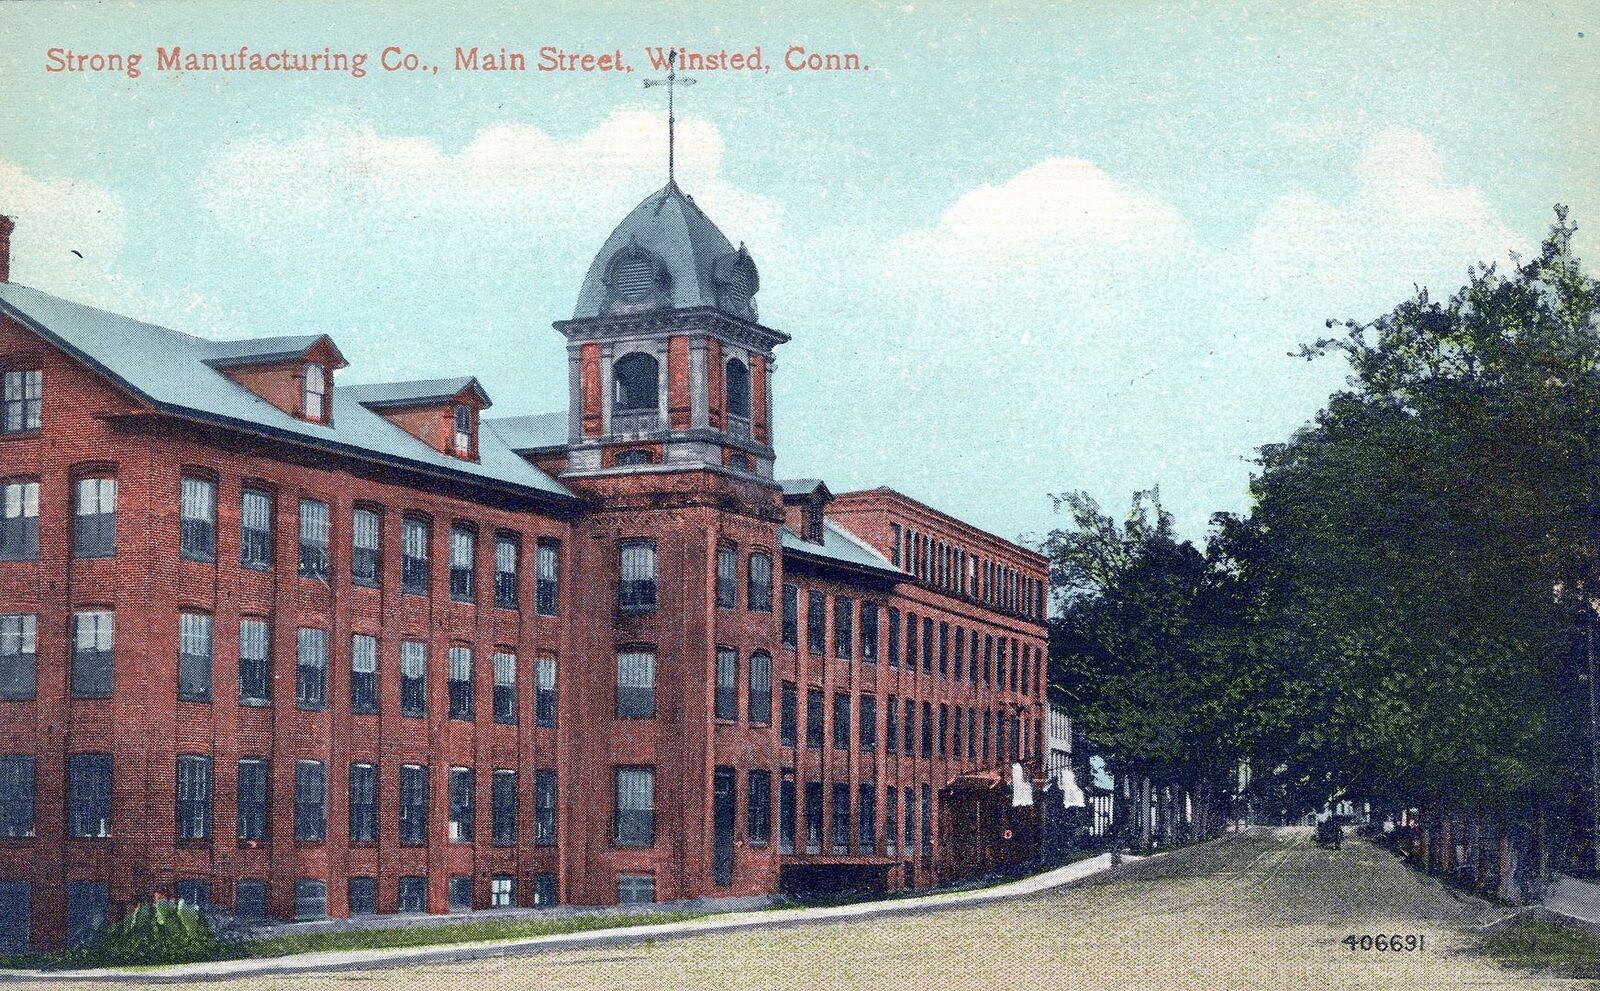 WINSTED CT - Strong Manufacturing Co. Main Street Postcard